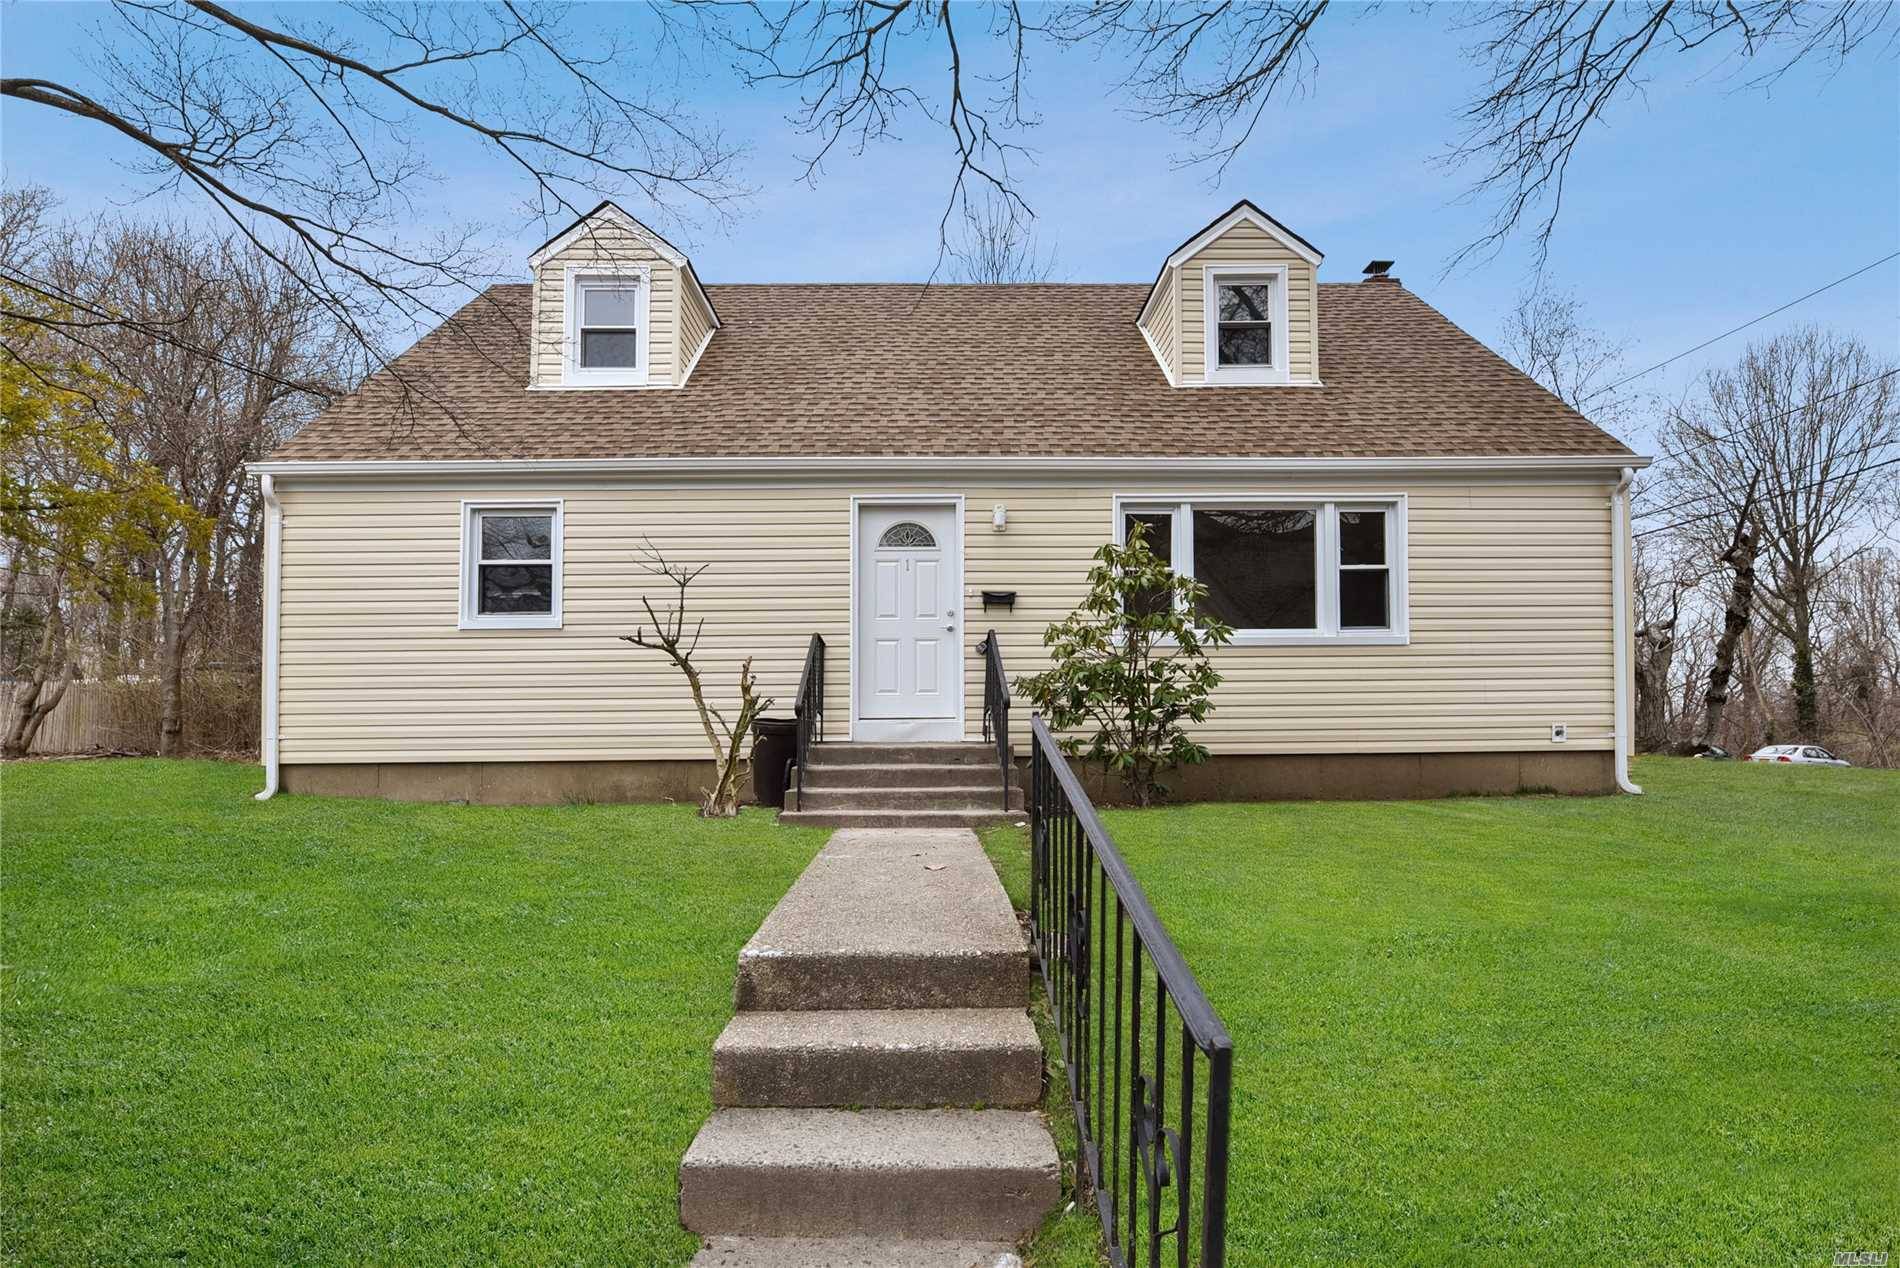 Glen Cove. Nicely Renovated Cape Home, New Kitchen with New Appliances, New Roof, New Siding, 4 Bedrooms, 3 Full Baths, Wood Floors, Tile Finished Basement with a Full Bath.